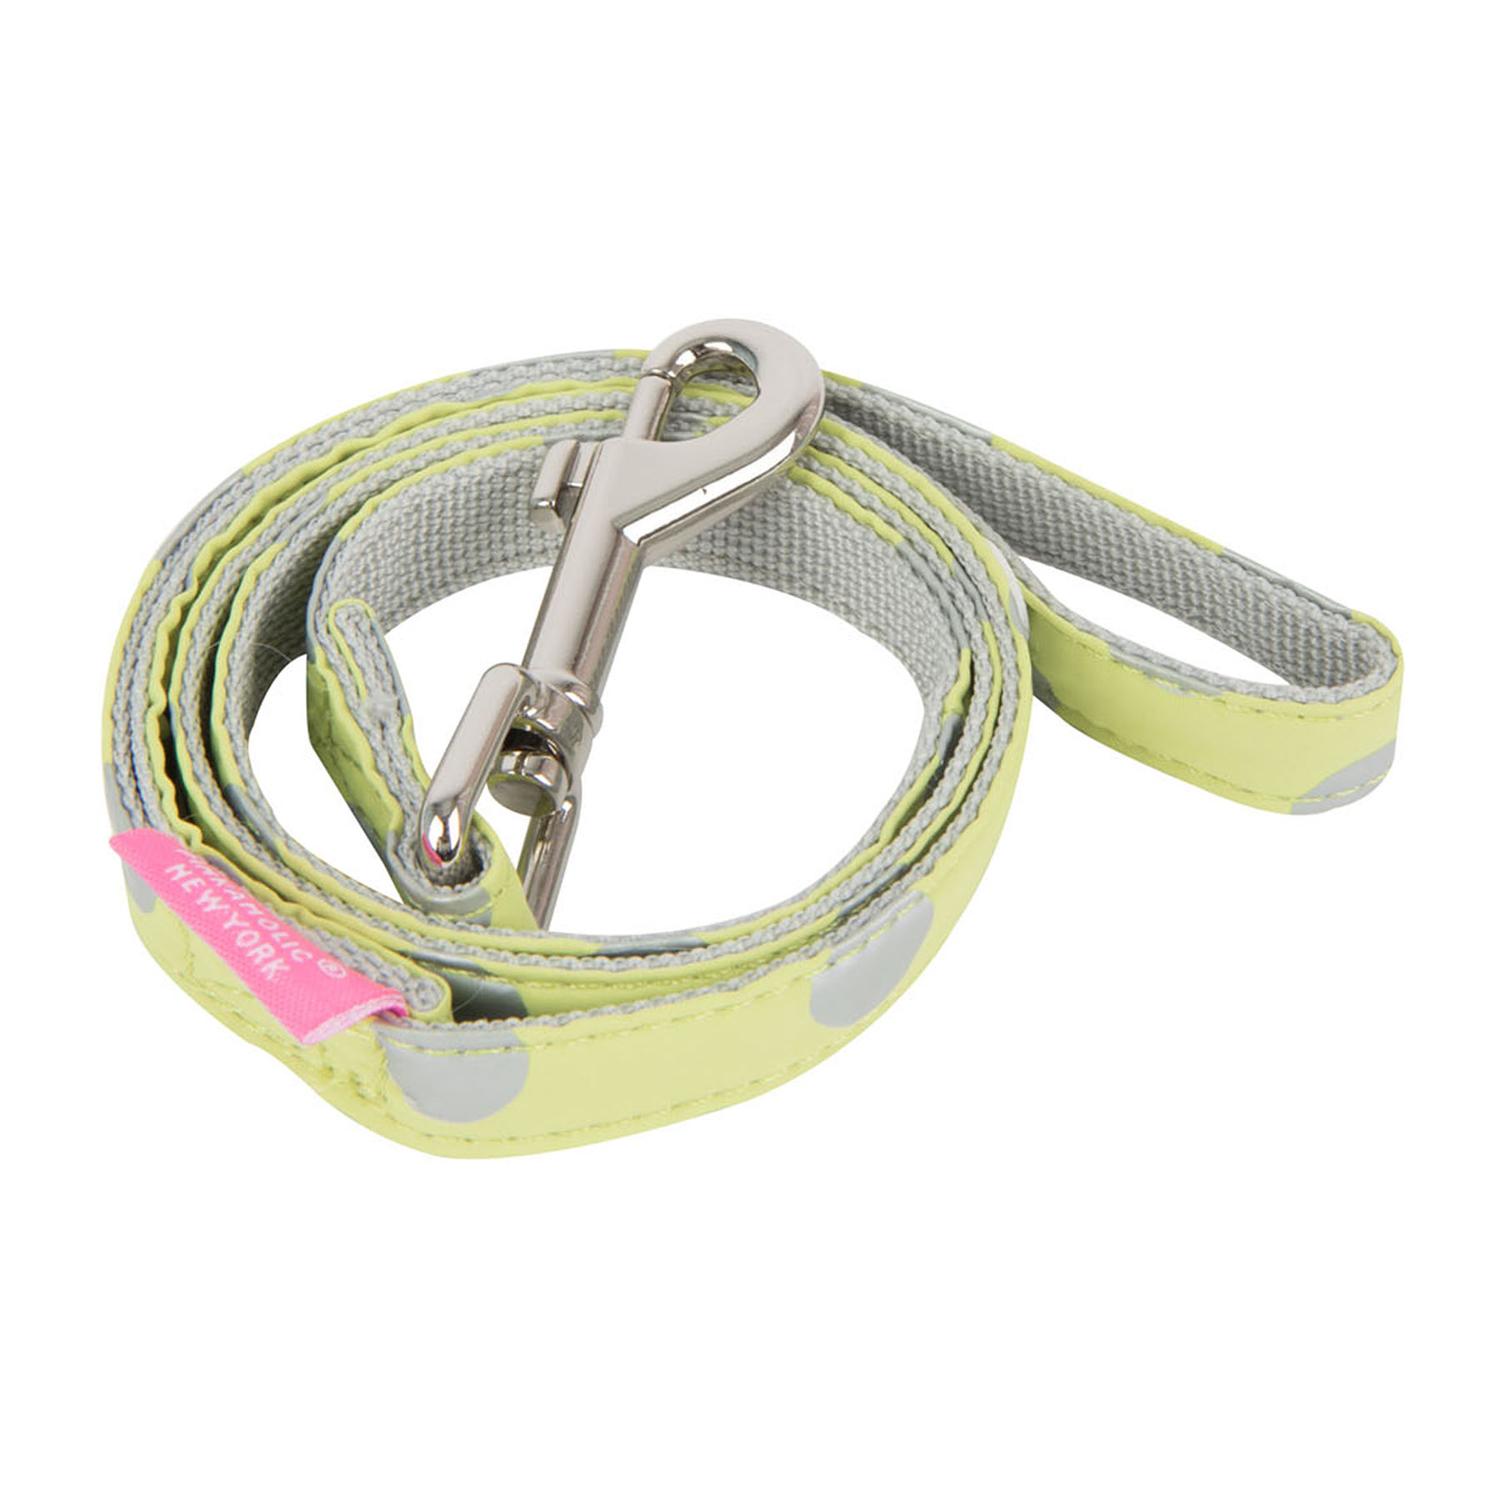 Chic Dog Leash by Pinkaholic - Lime